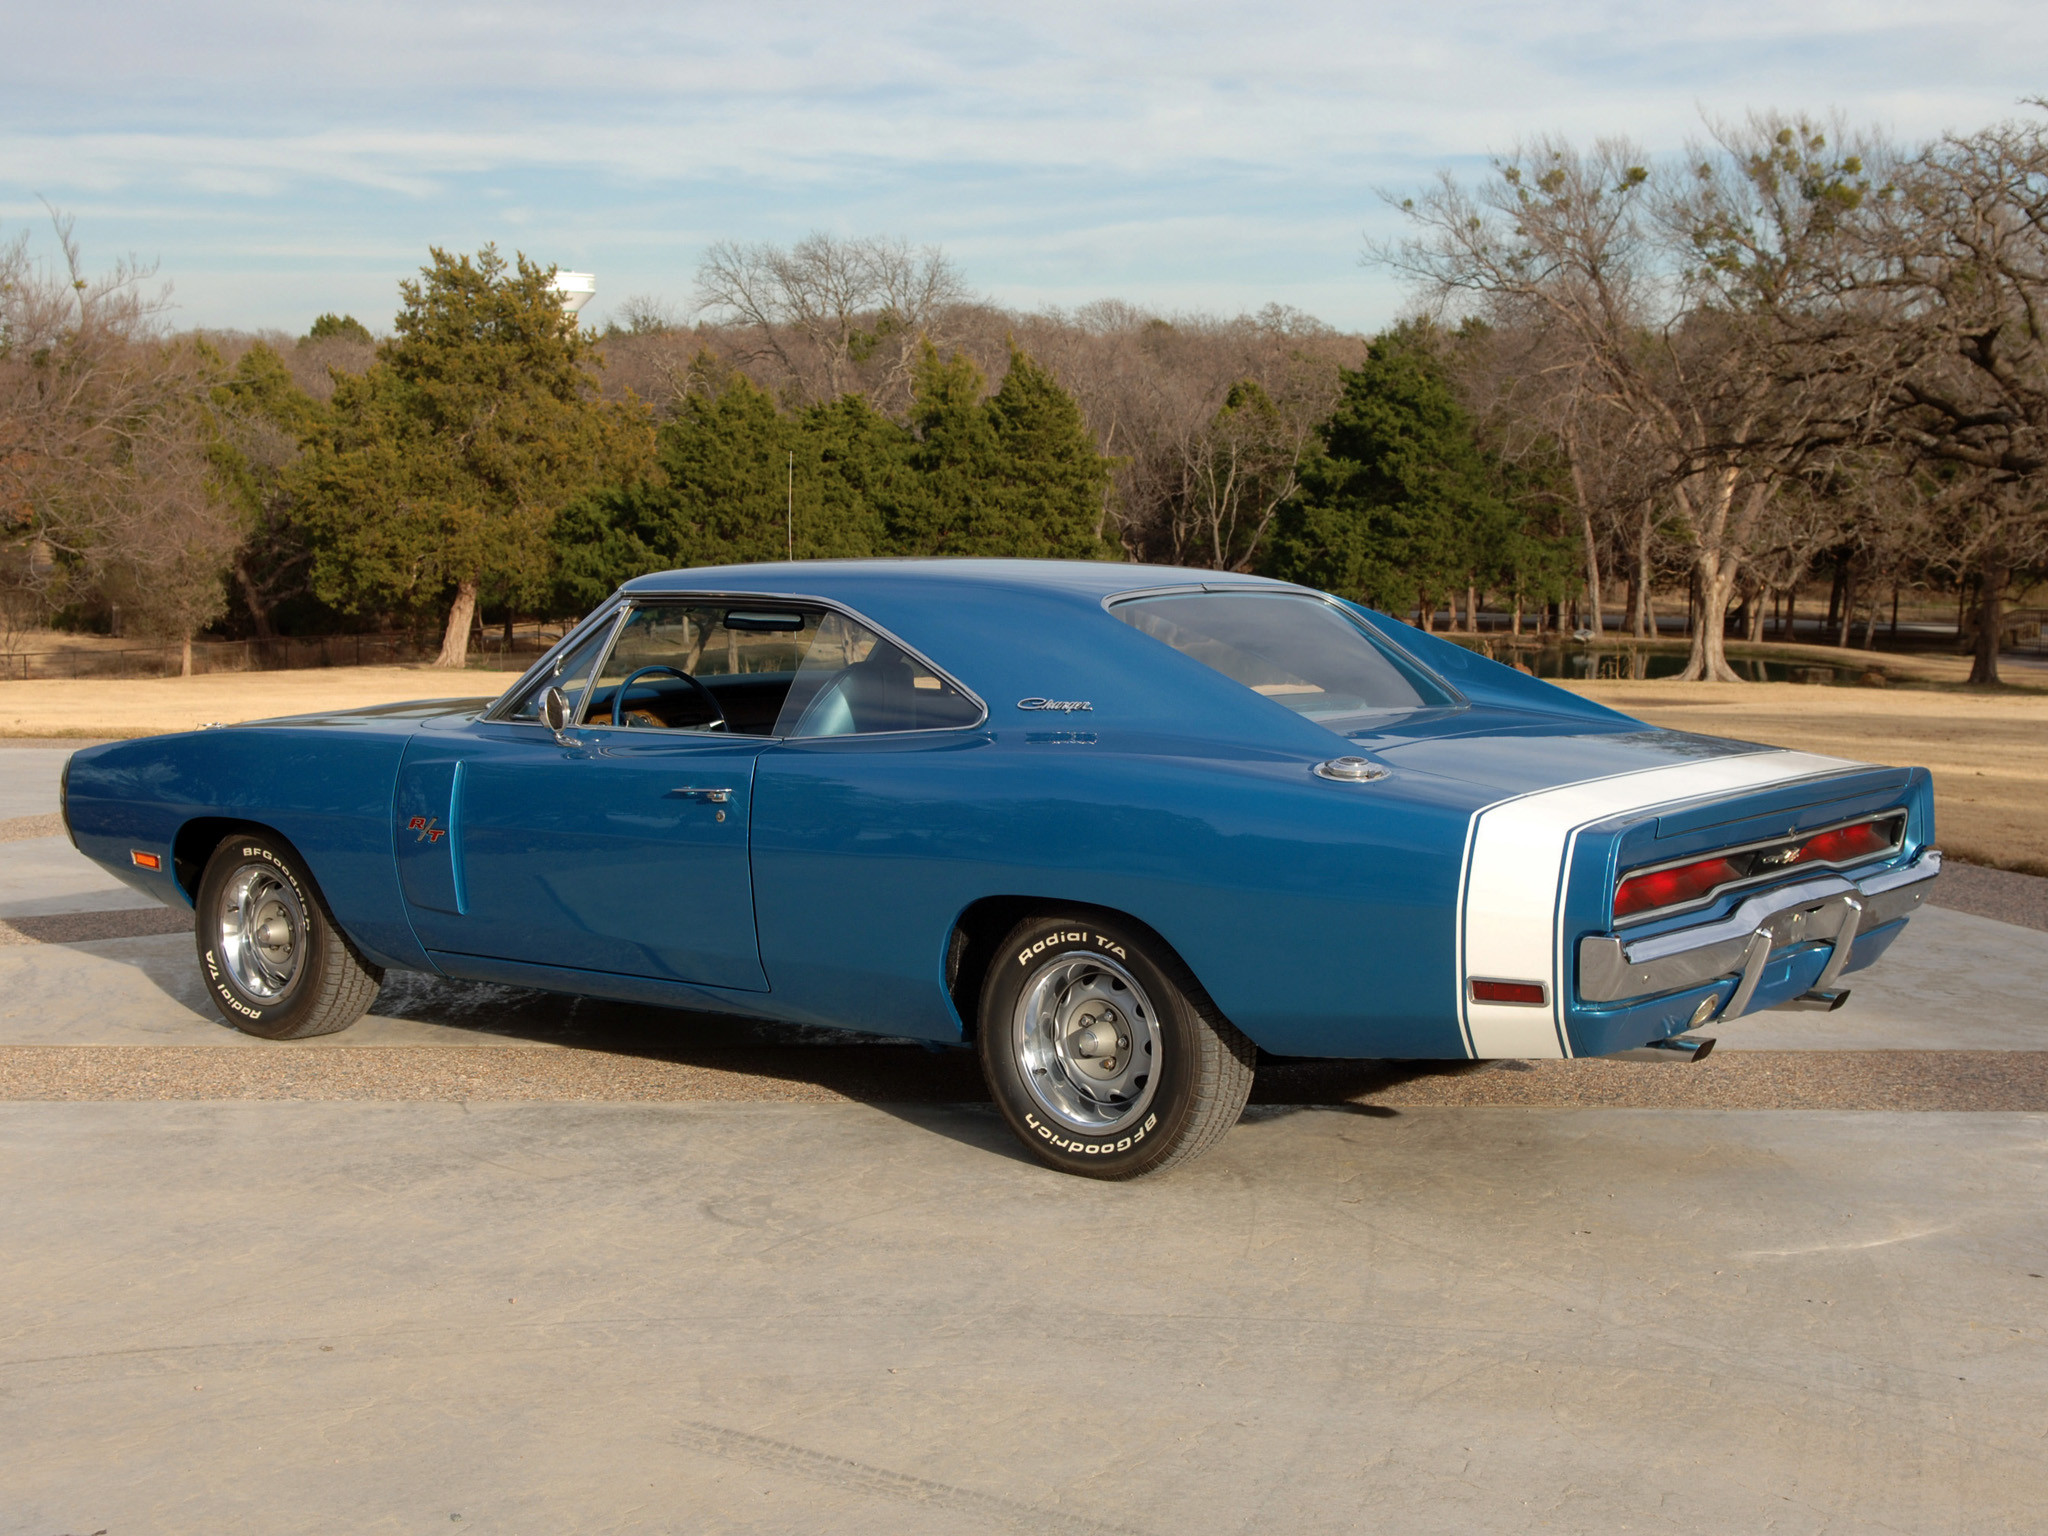 1970 Dodge Charger R-T 440 Six-Pack muscle classic f wallpaper |  | 116932 | WallpaperUP